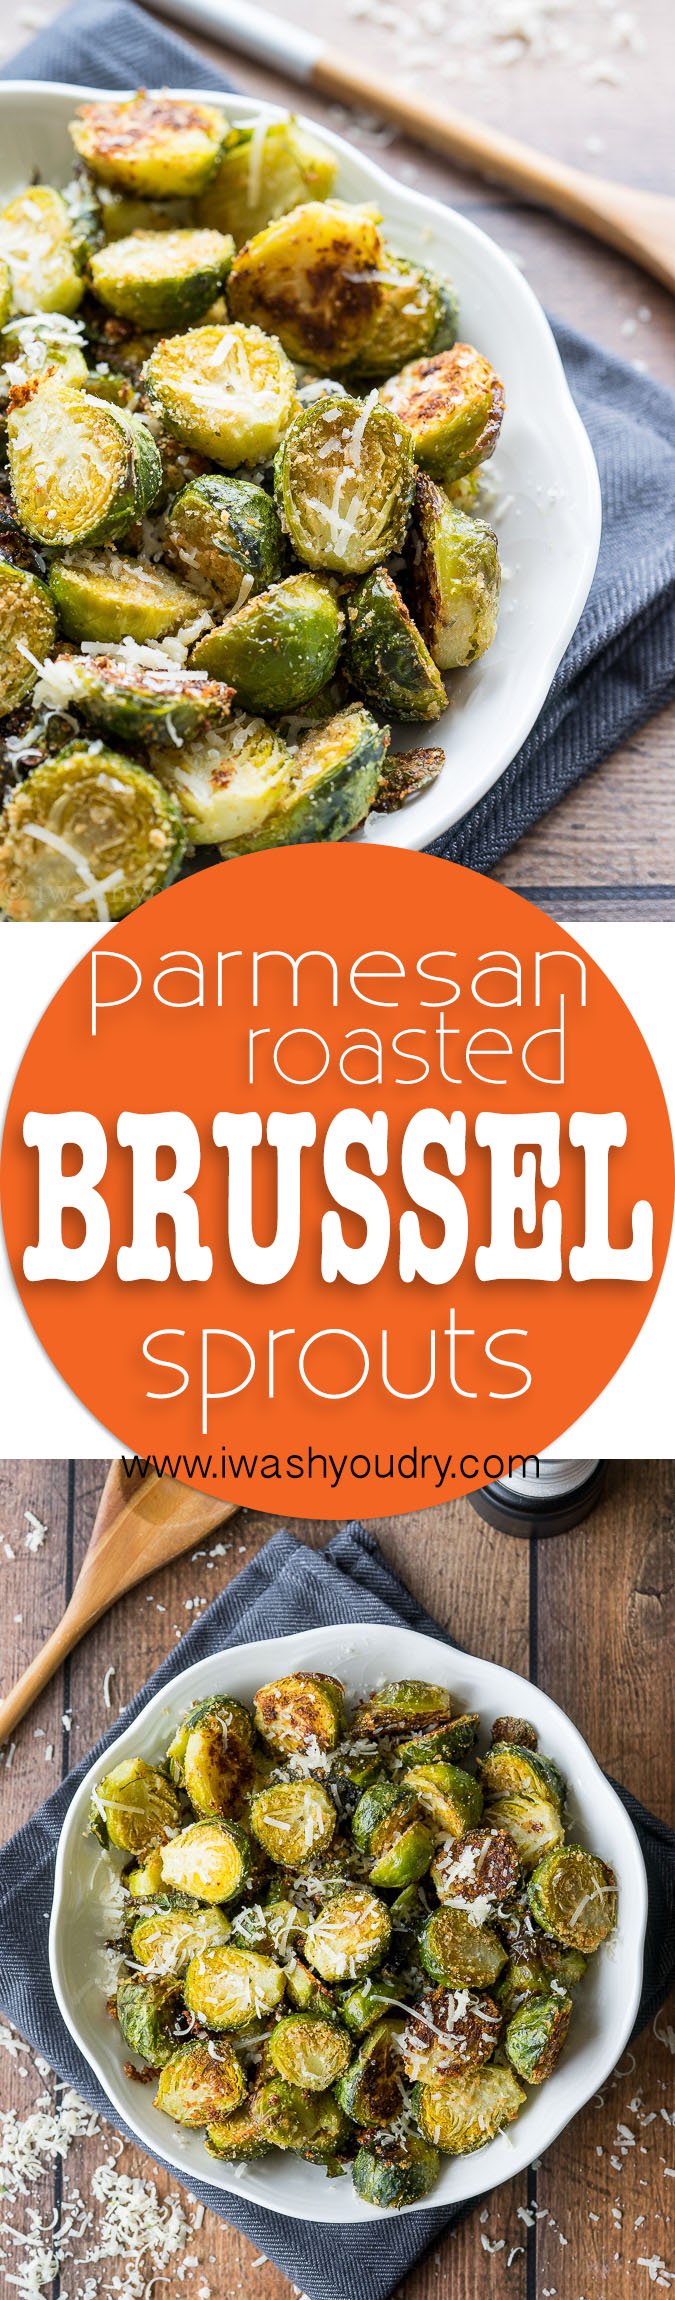 I'm obsessed with these Parmesan Roasted Brussel Sprouts! Such an easy side dish recipe to make and goes perfectly with everything! Even my kids love it!